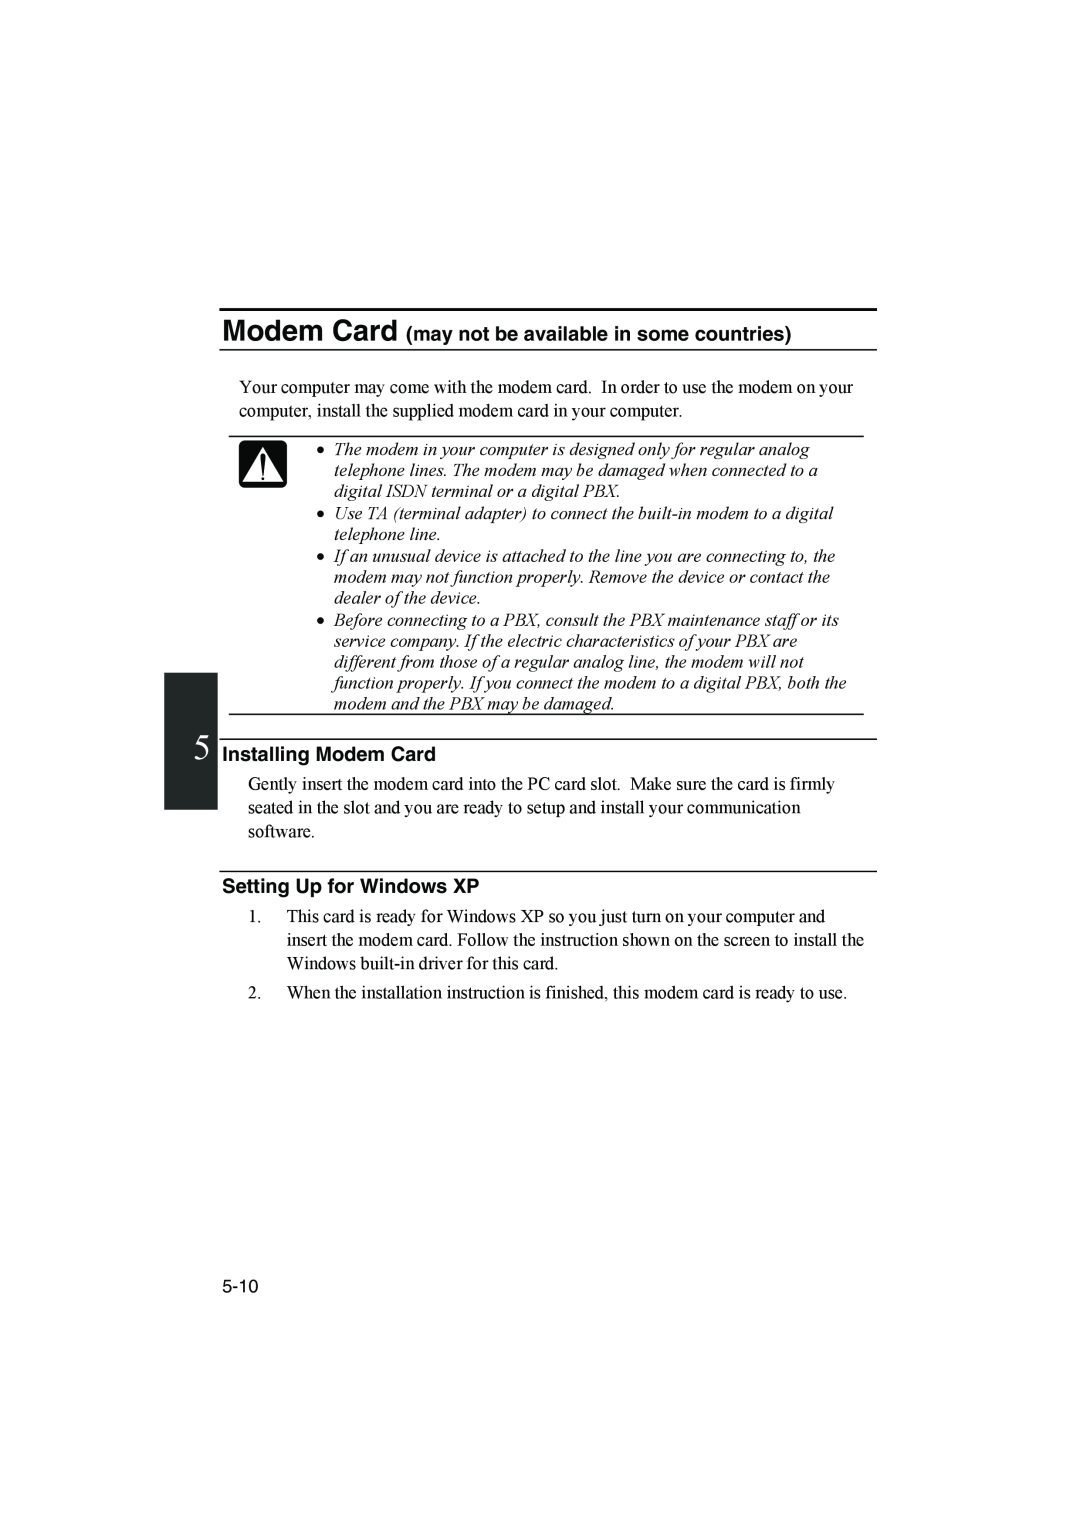 Sharp PC-MM1 manual Modem Card may not be available in some countries, Installing Modem Card, Setting Up for Windows XP 